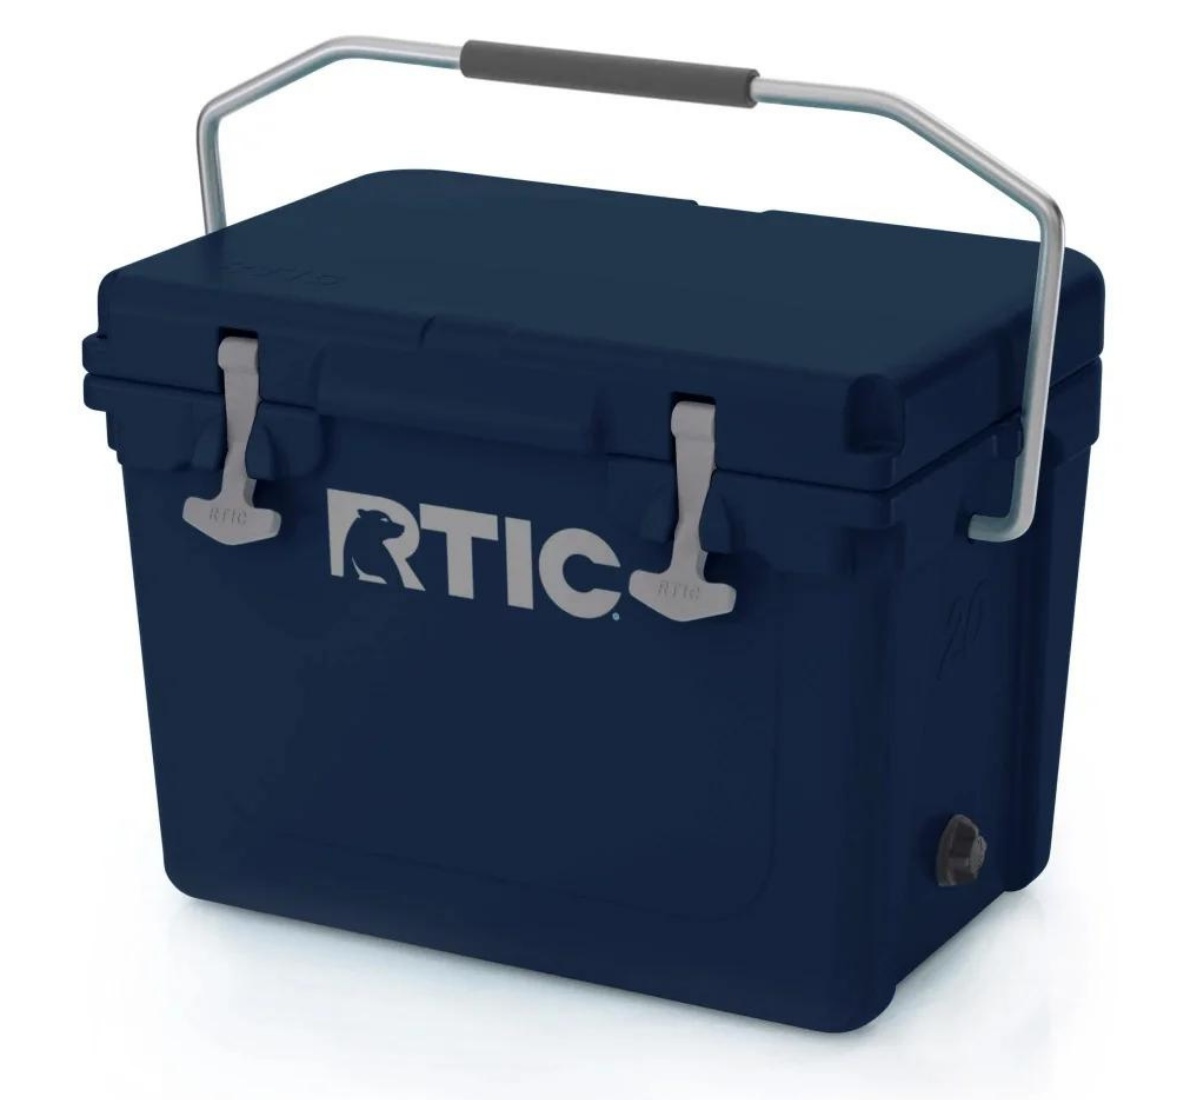 RTIC 20 Review